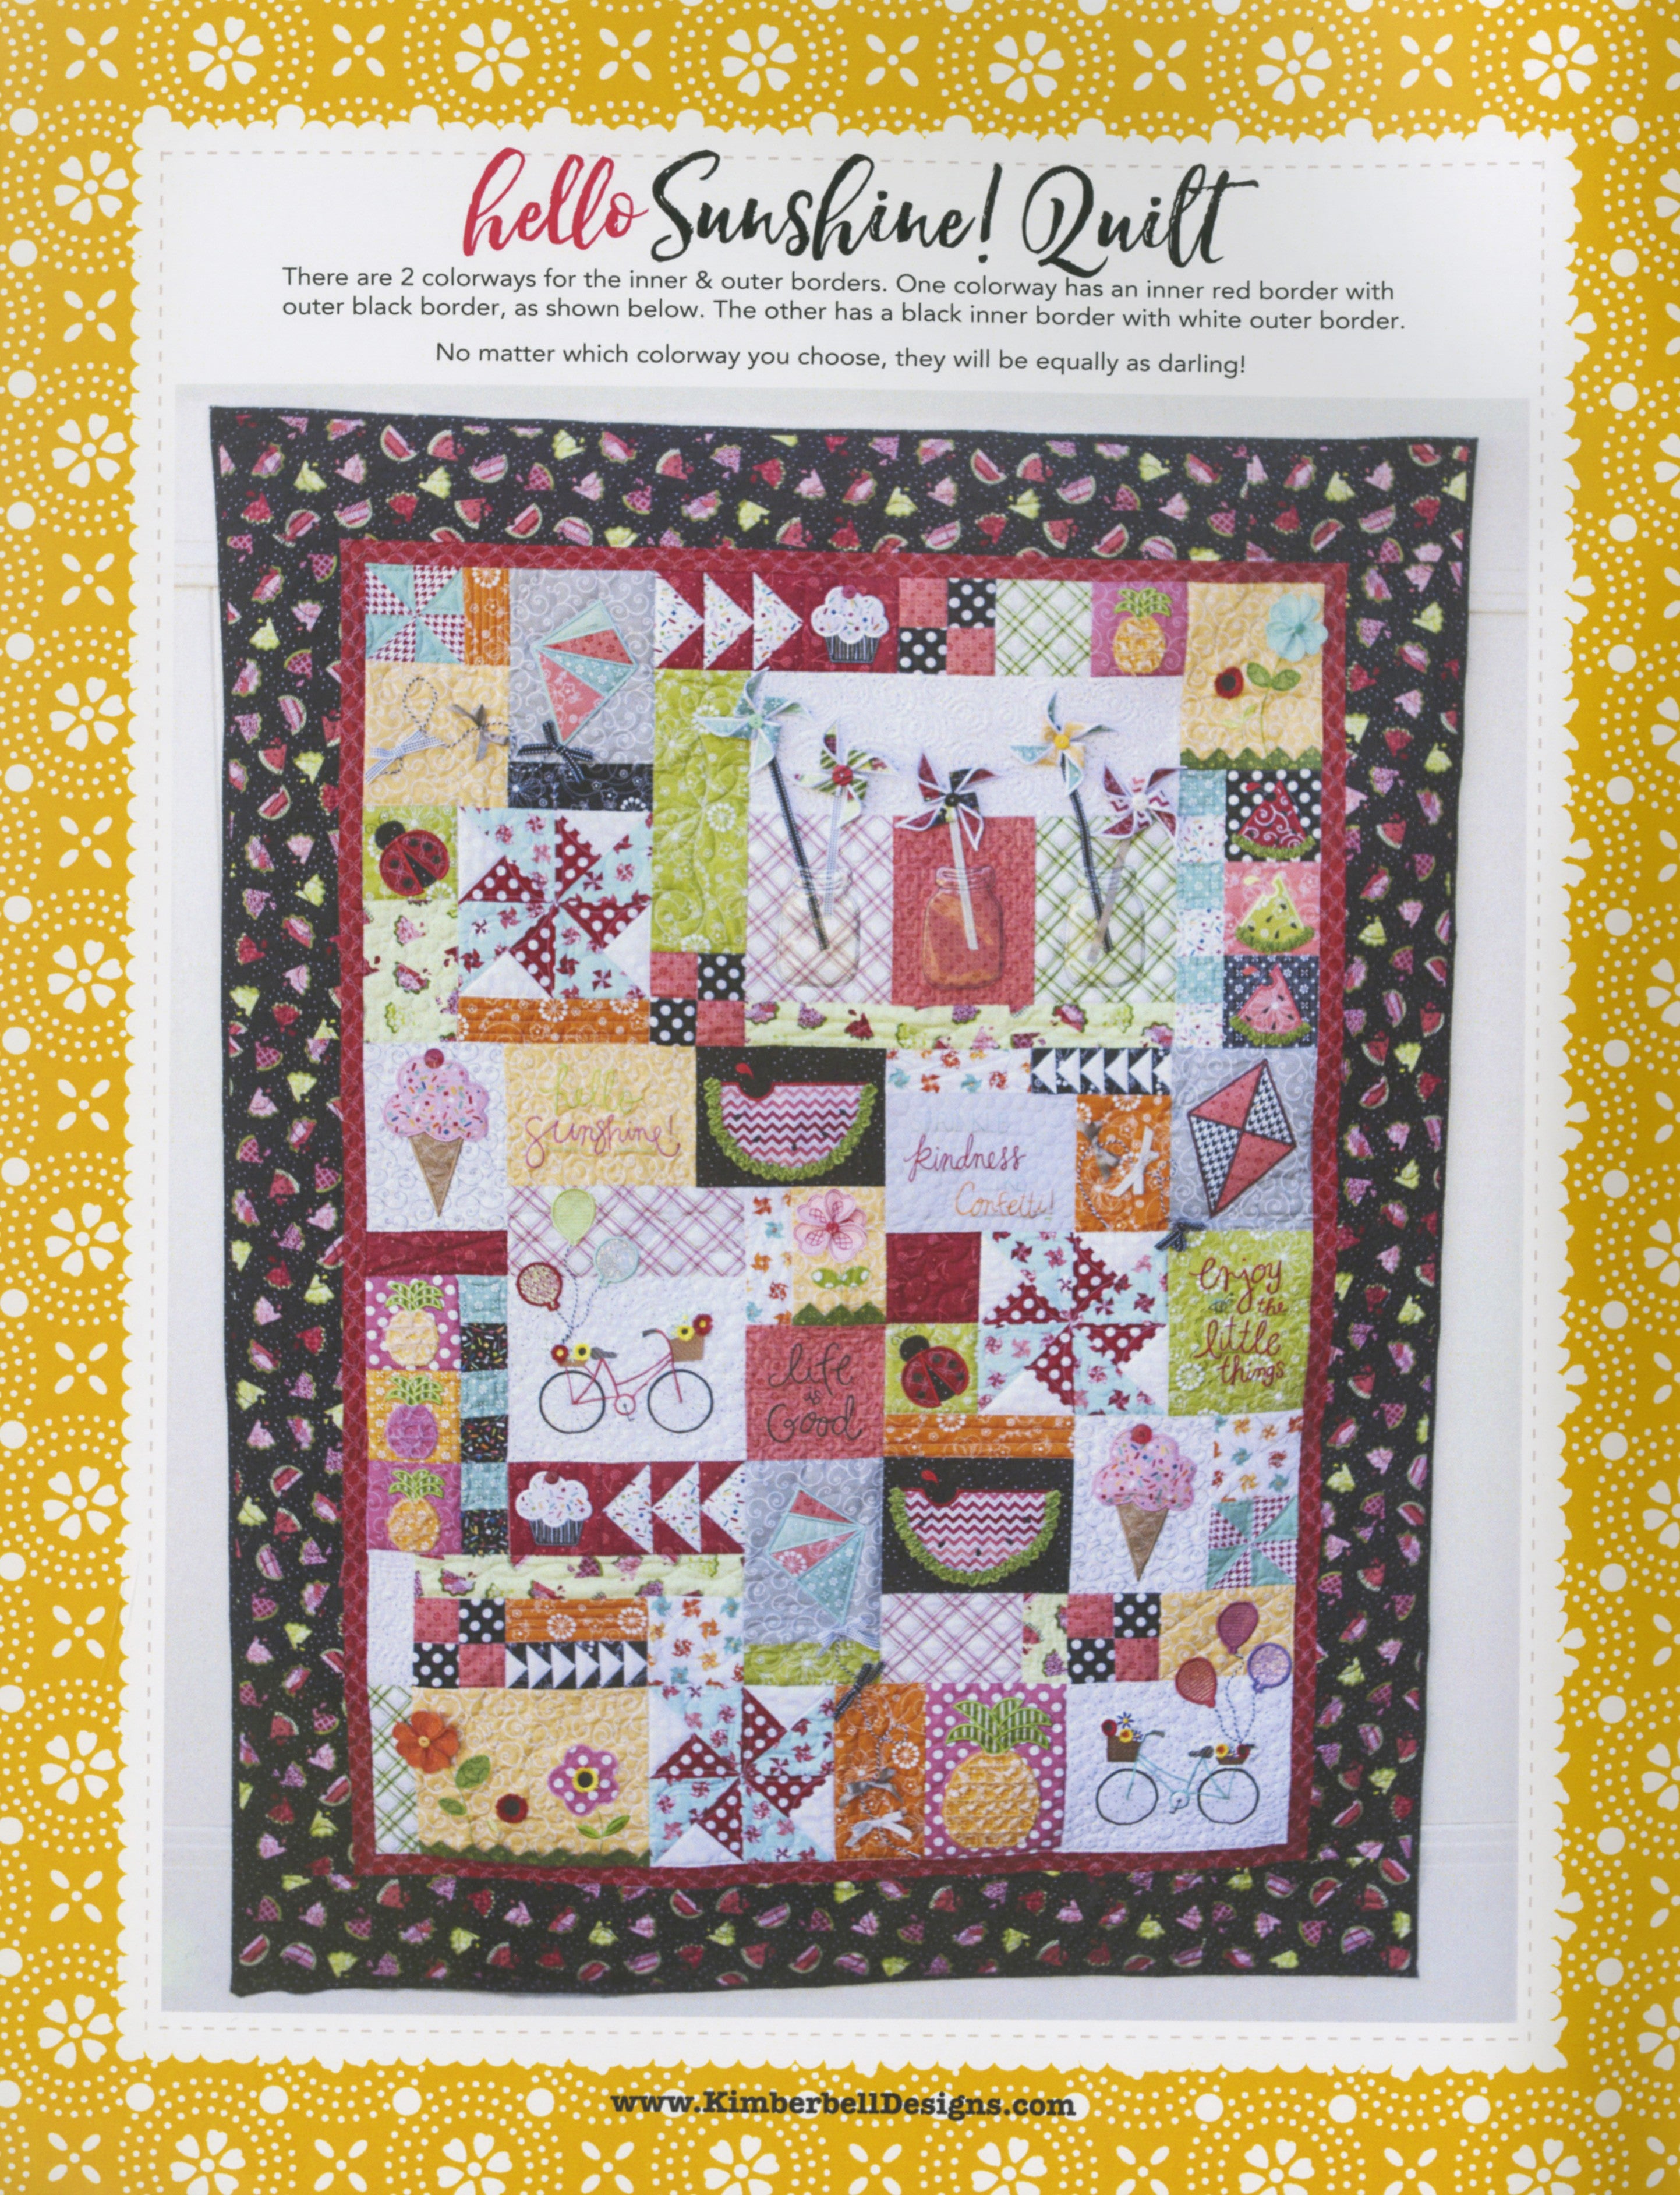 Kimberbell Hello Sunshine (The Machine Embroidery Version) Quilt Pattern Book with CD by Kim Christopherson for Kimberbell